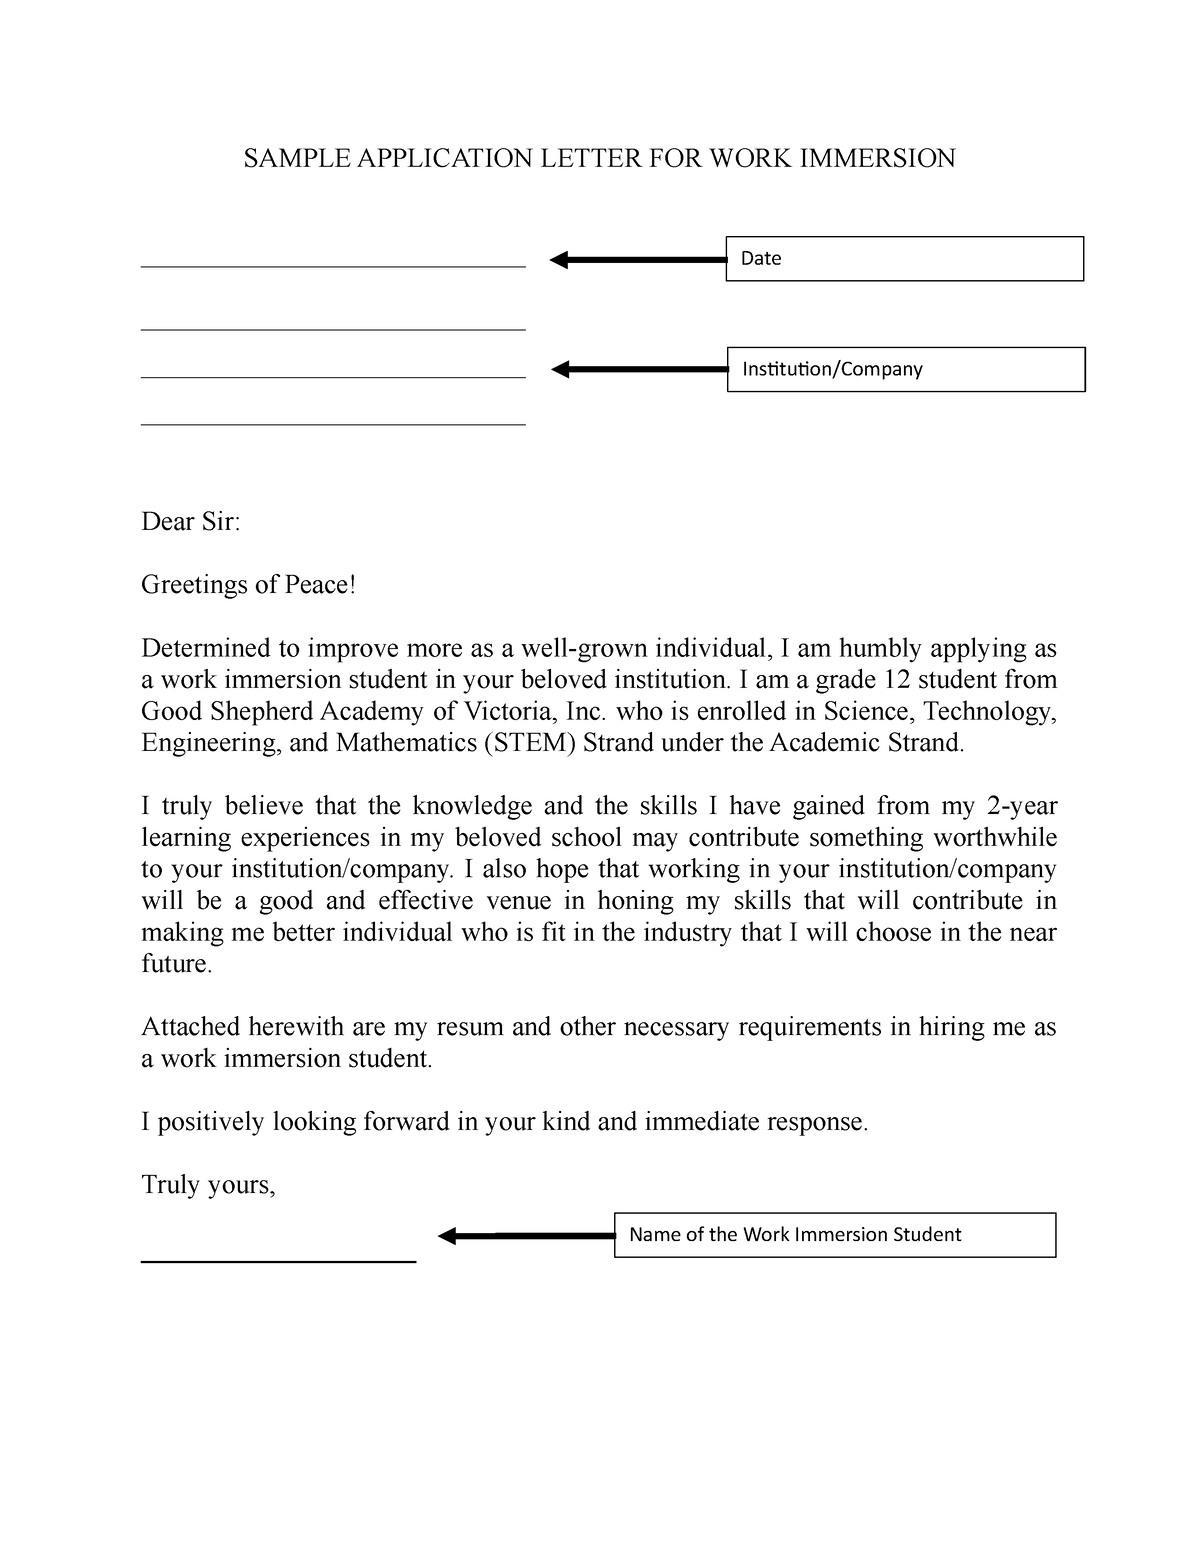 example of application letter for work immersion brainly